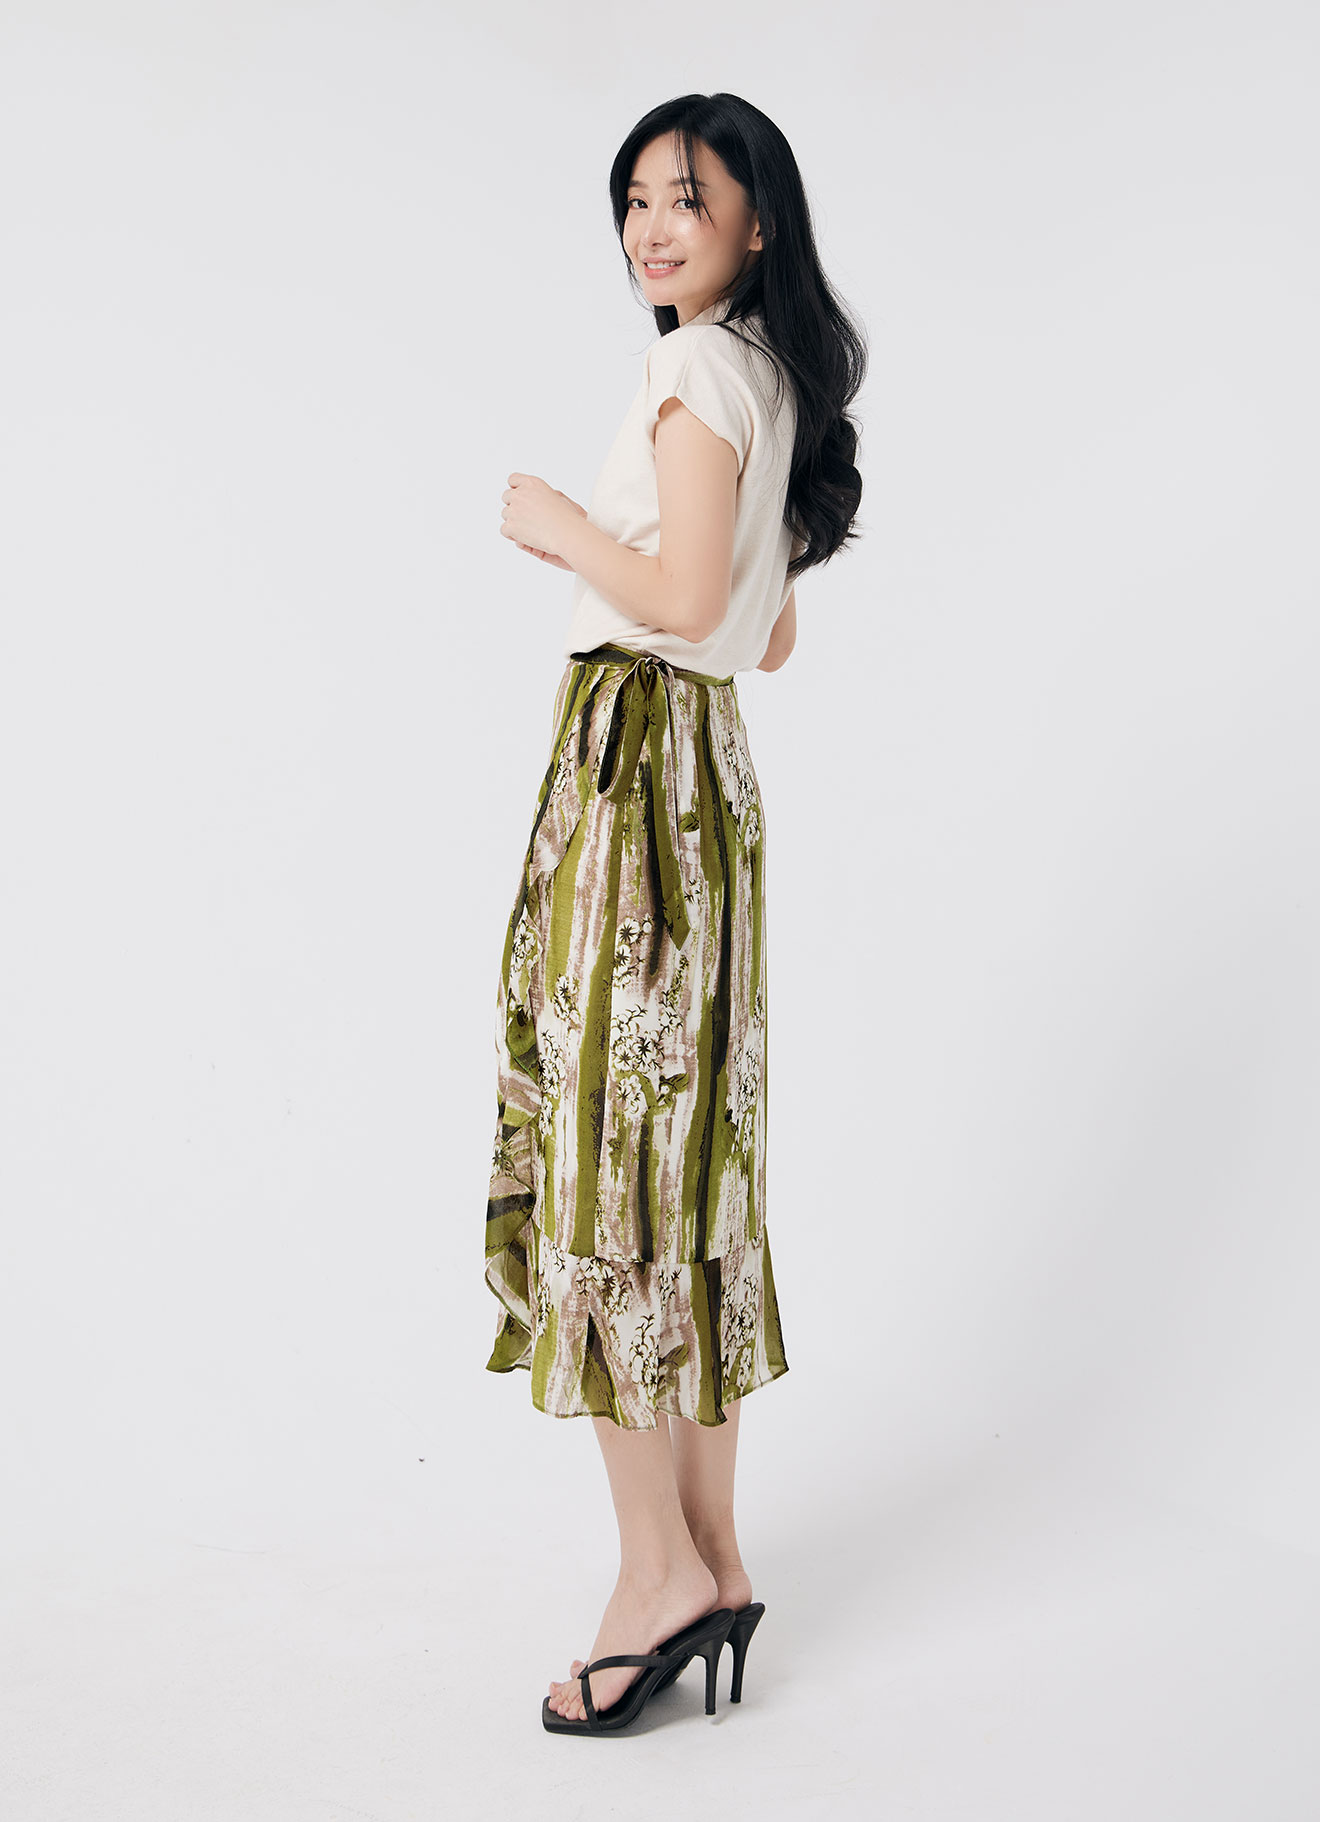 Woodbine by Pleated Skirt